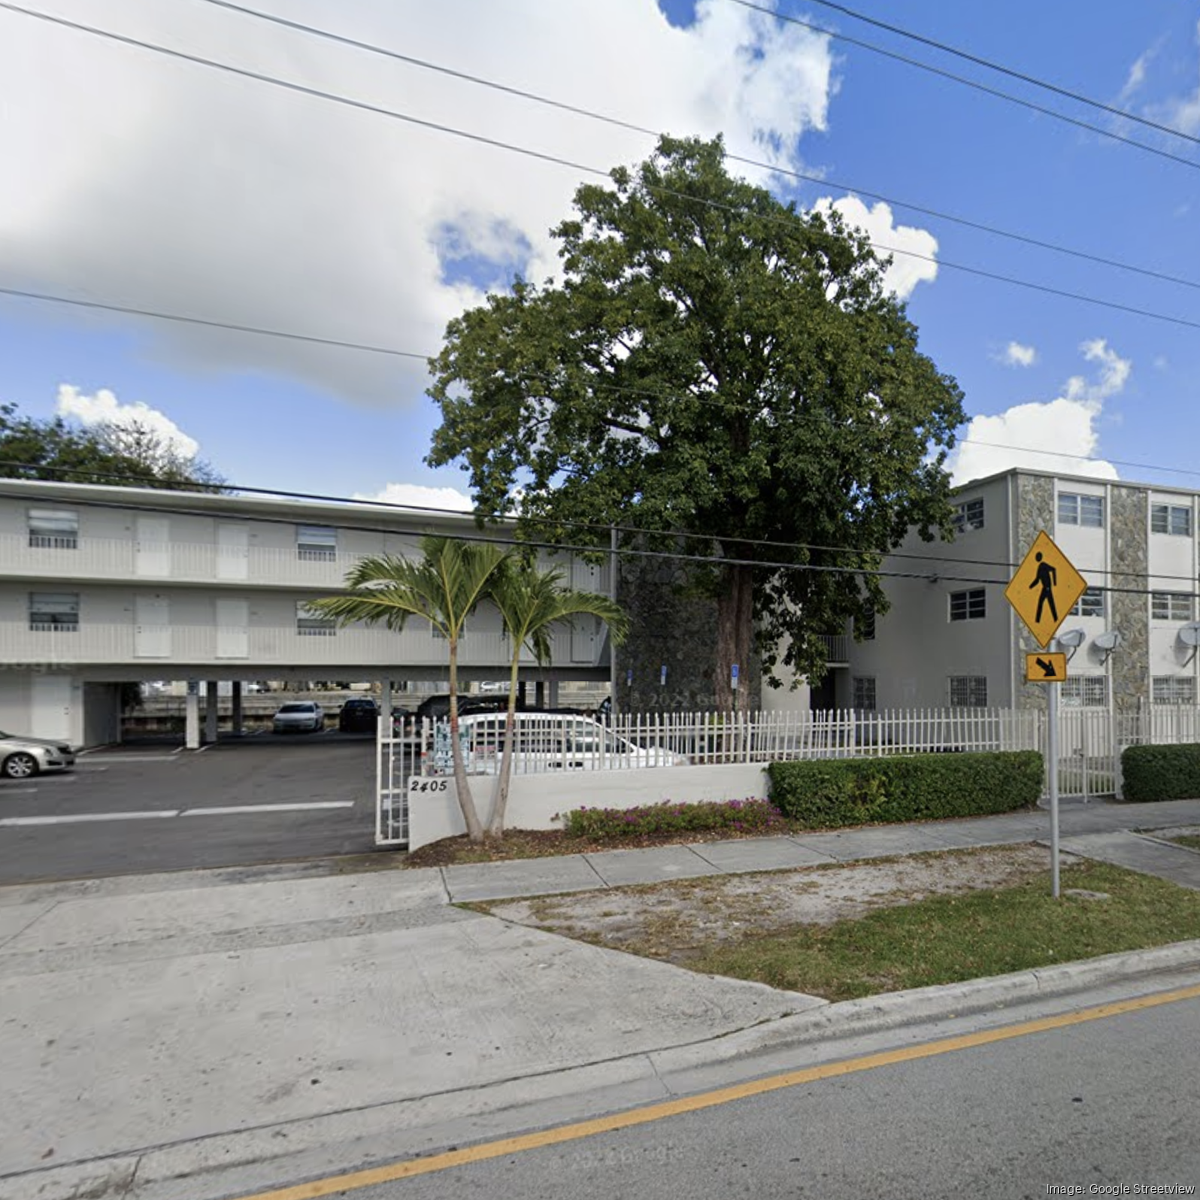 Firm Business Ramon sells of Charles Opa-Locka apartments Mijares Sacher by led to South Journal - Florida firm